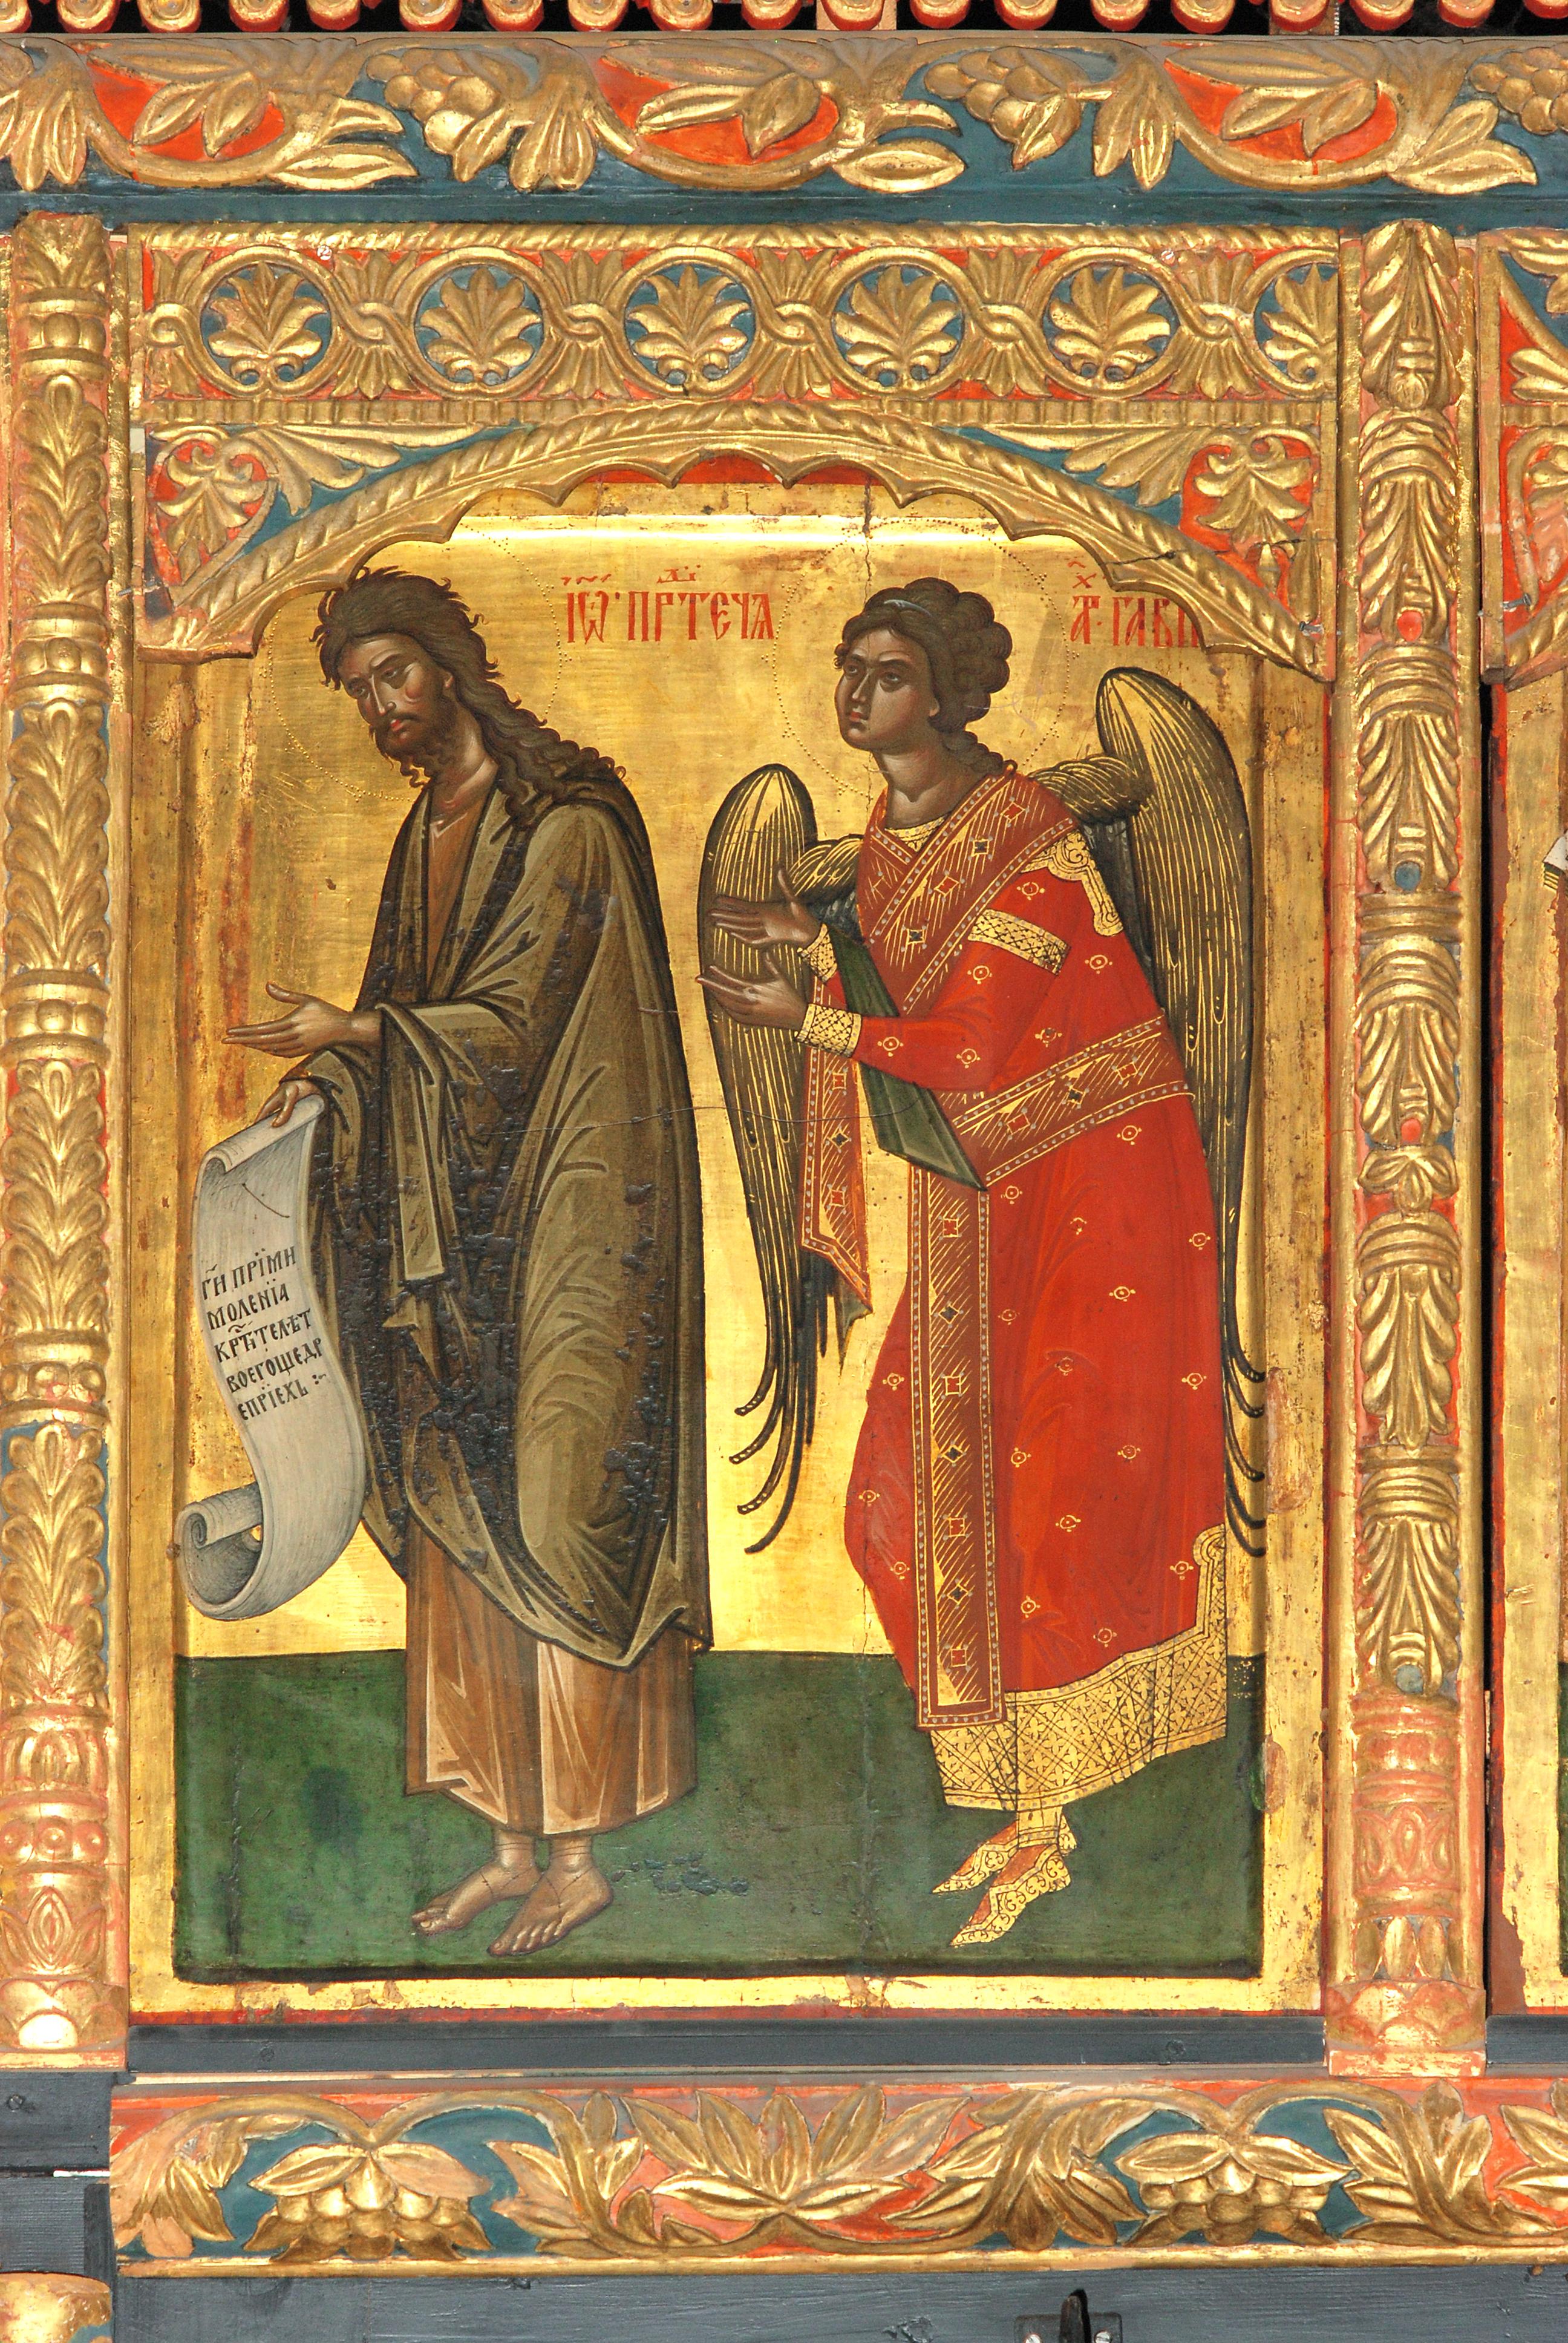 Icon from the Deësis iconostasis row of Krušedol Monastery church, early 16th century, Serbia; woodwork 1653 (source: M. Candir and S. Ercegan)